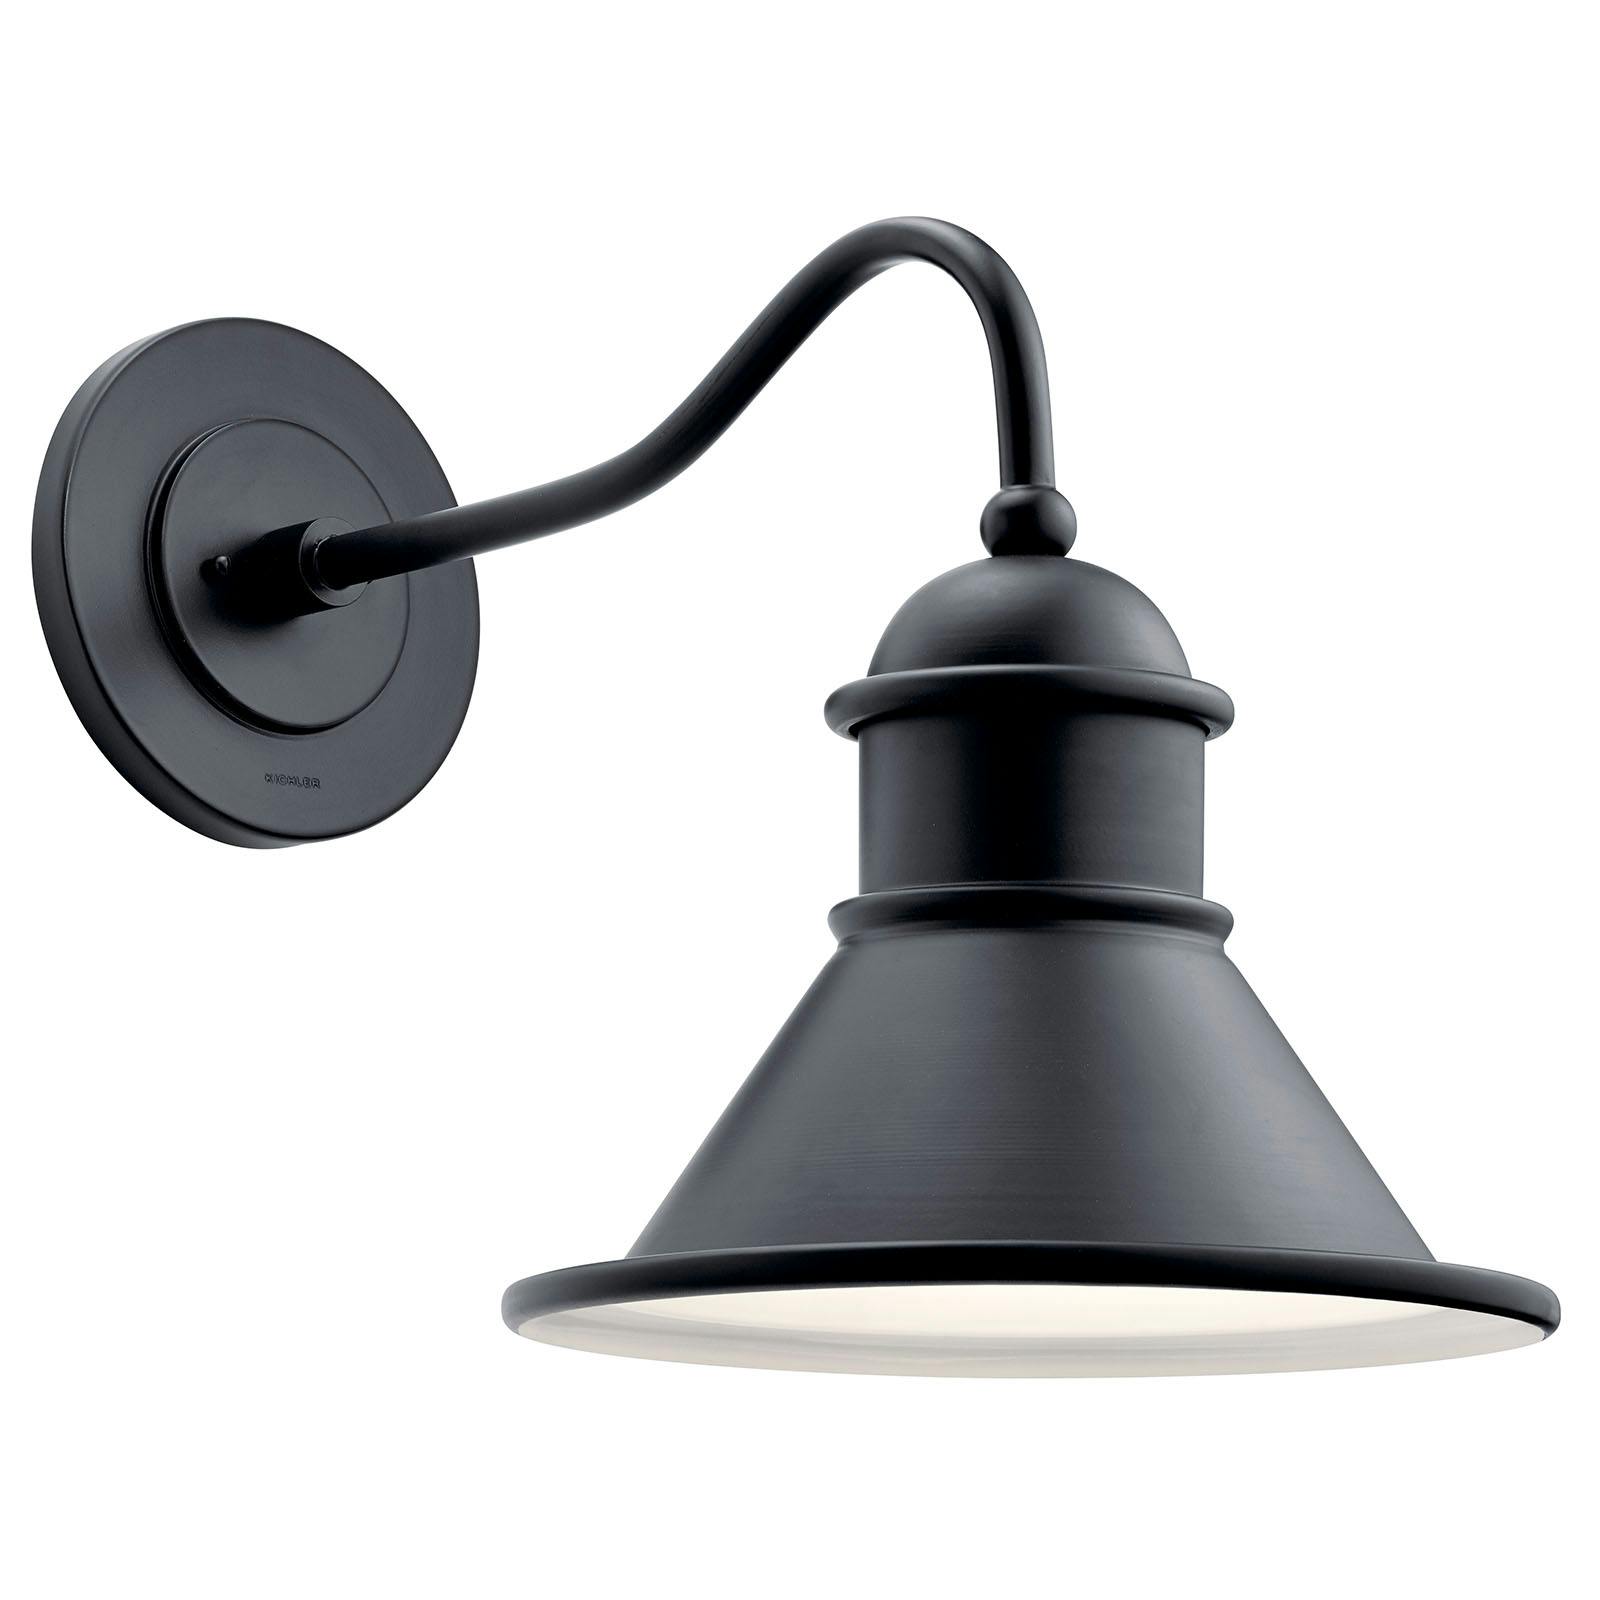 Northland 16.75" Wall Light Black on a white background